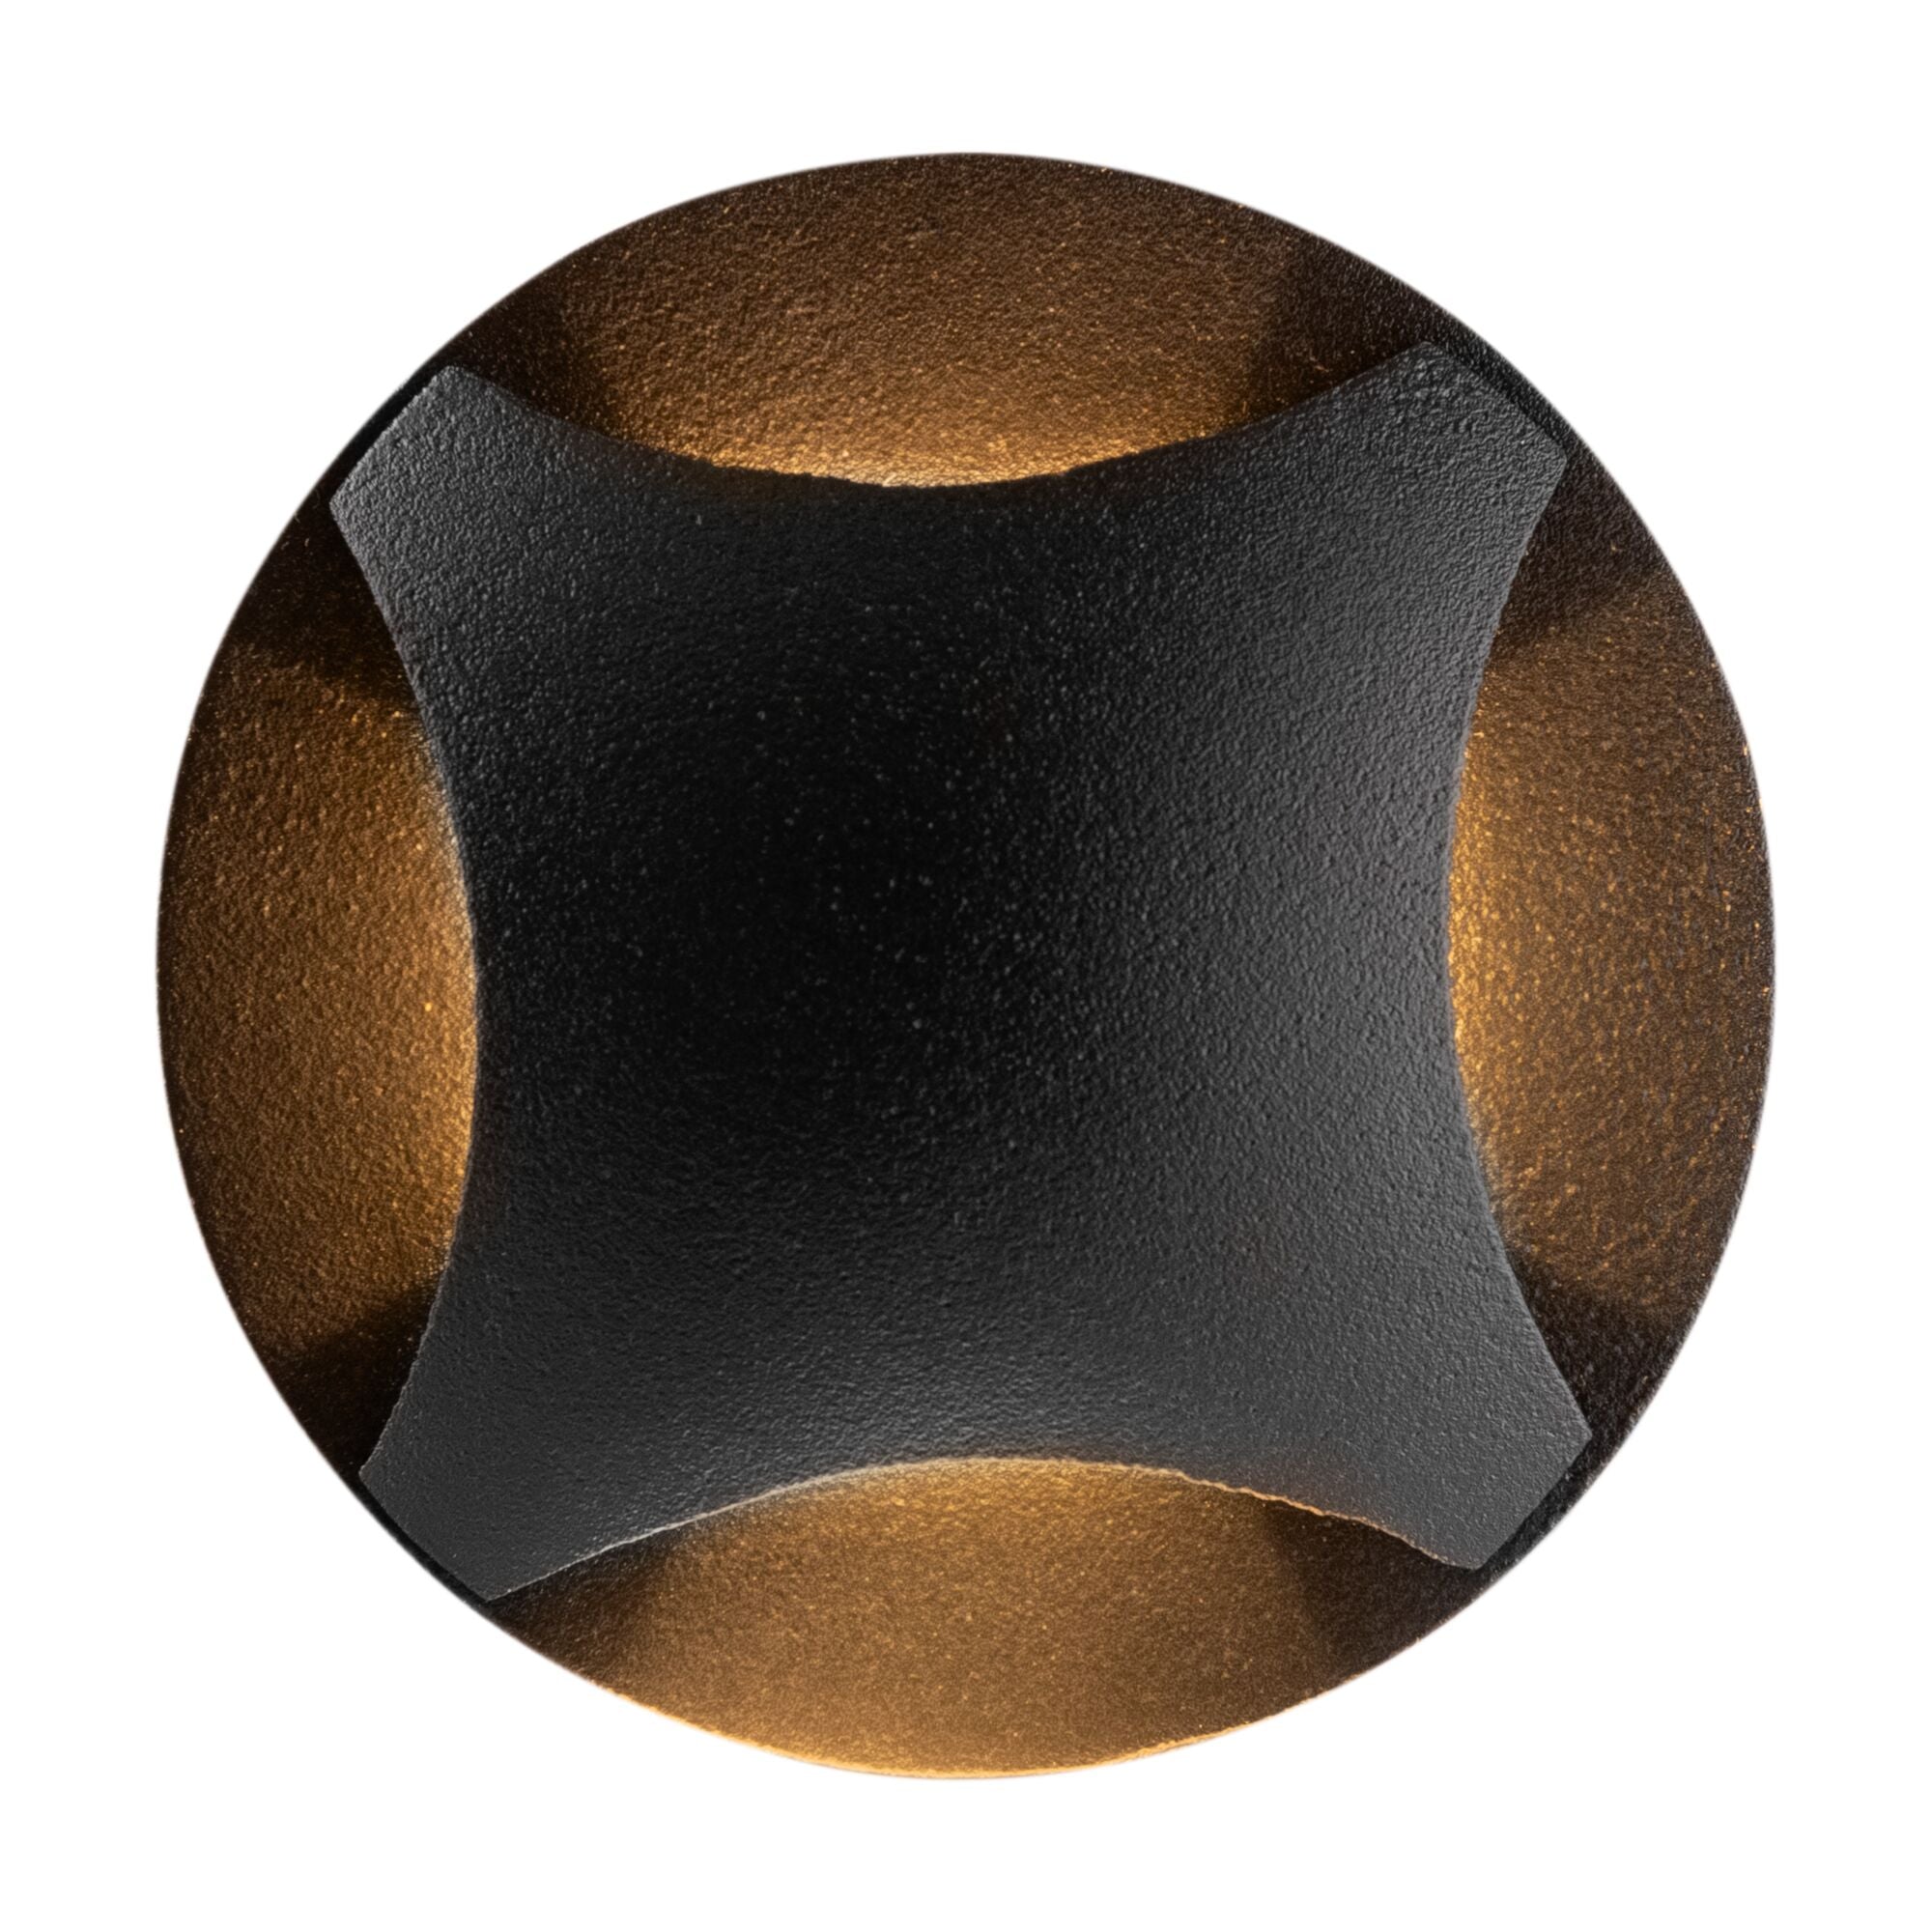 Biscotti Recessed LED Wall Light - Black/White